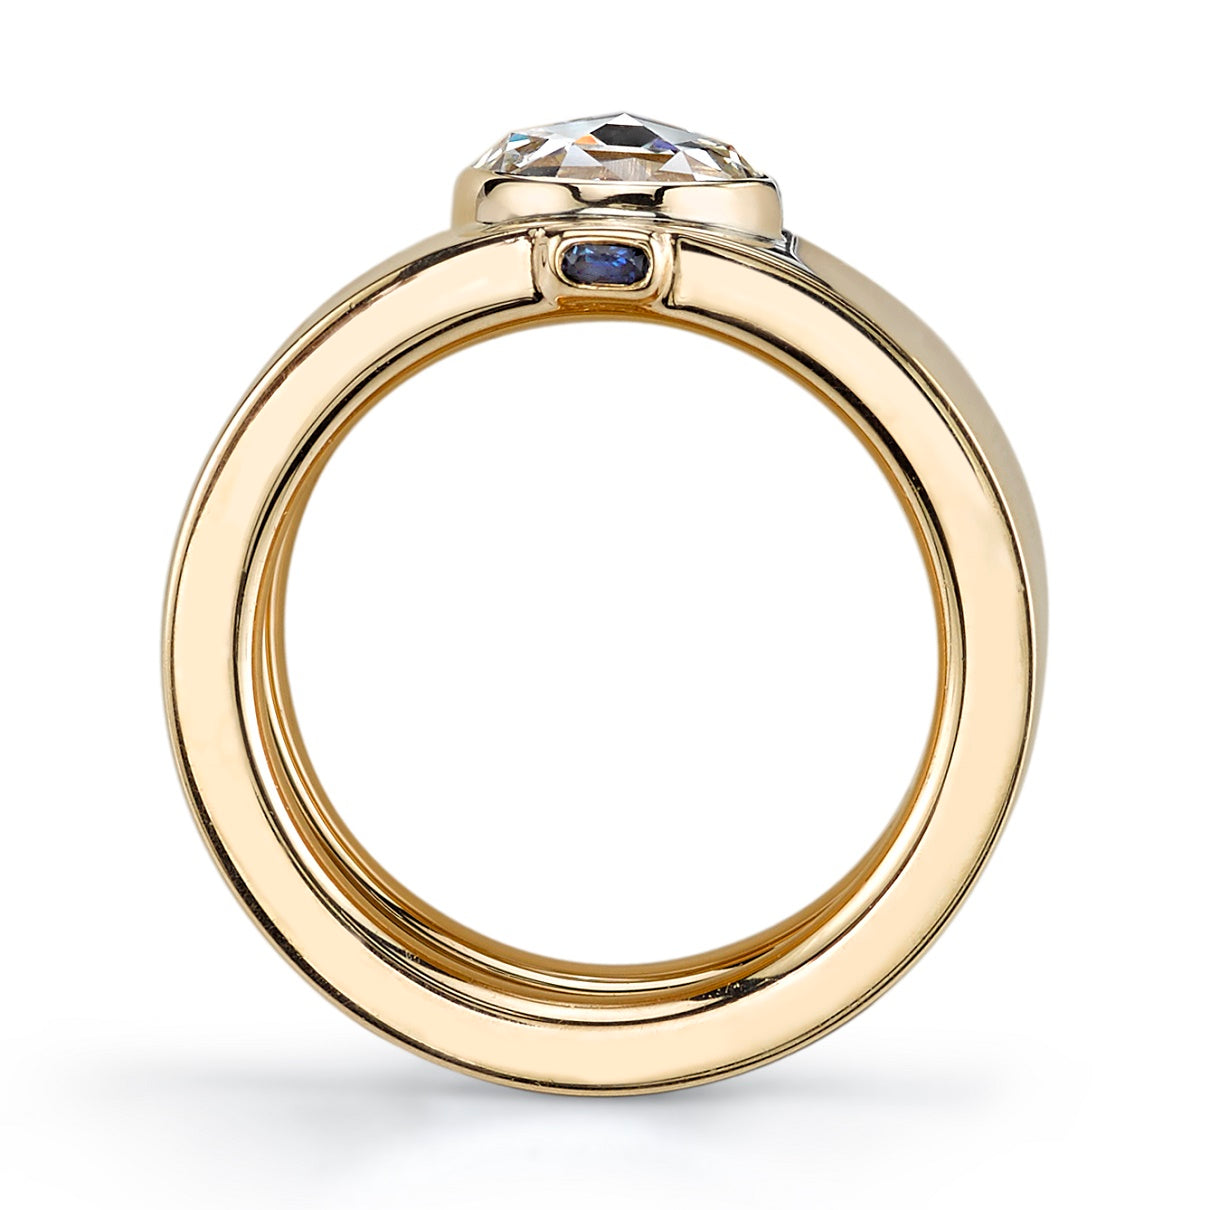 SINGLE STONE CYGALLE RING featuring 1.11ct I/VS2 GIA certified rose cut diamond set in a handcrafted 18K yellow gold band. Peeking out on the sides, you will find two blue sapphires.